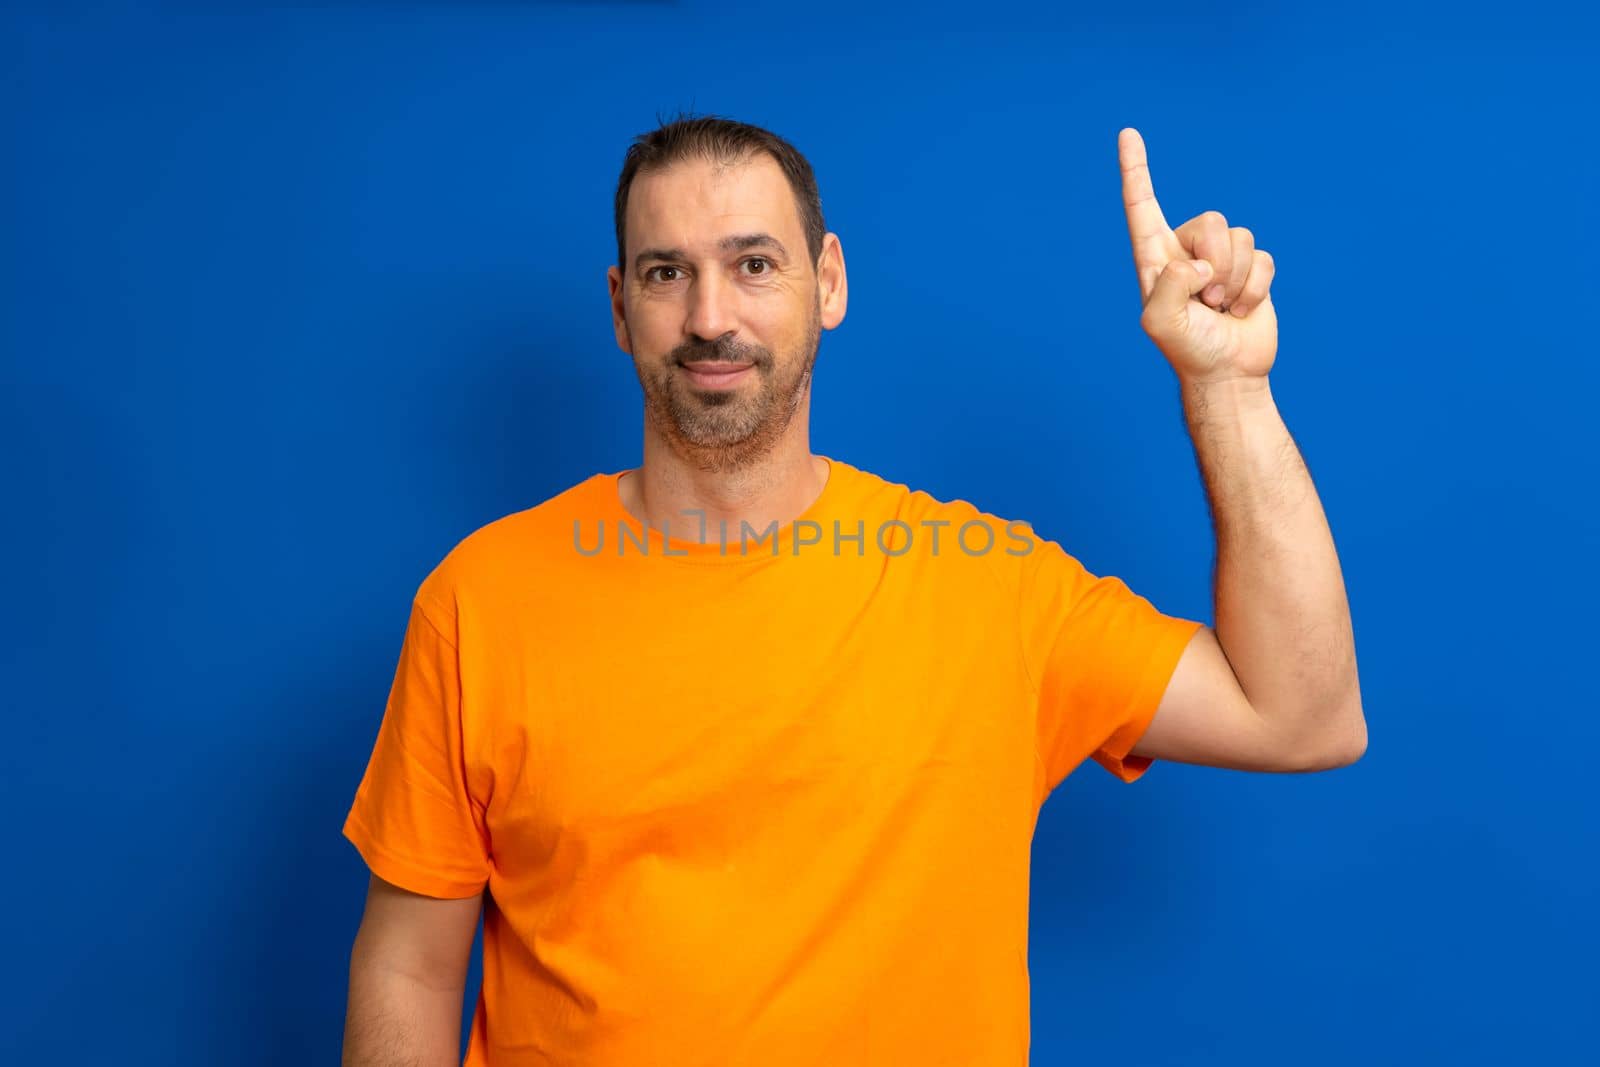 Insightful smart proactive caucasian man 40s in orange t-shirt holding index finger up with great new idea isolated on blue background studio portrait. People lifestyle concept.